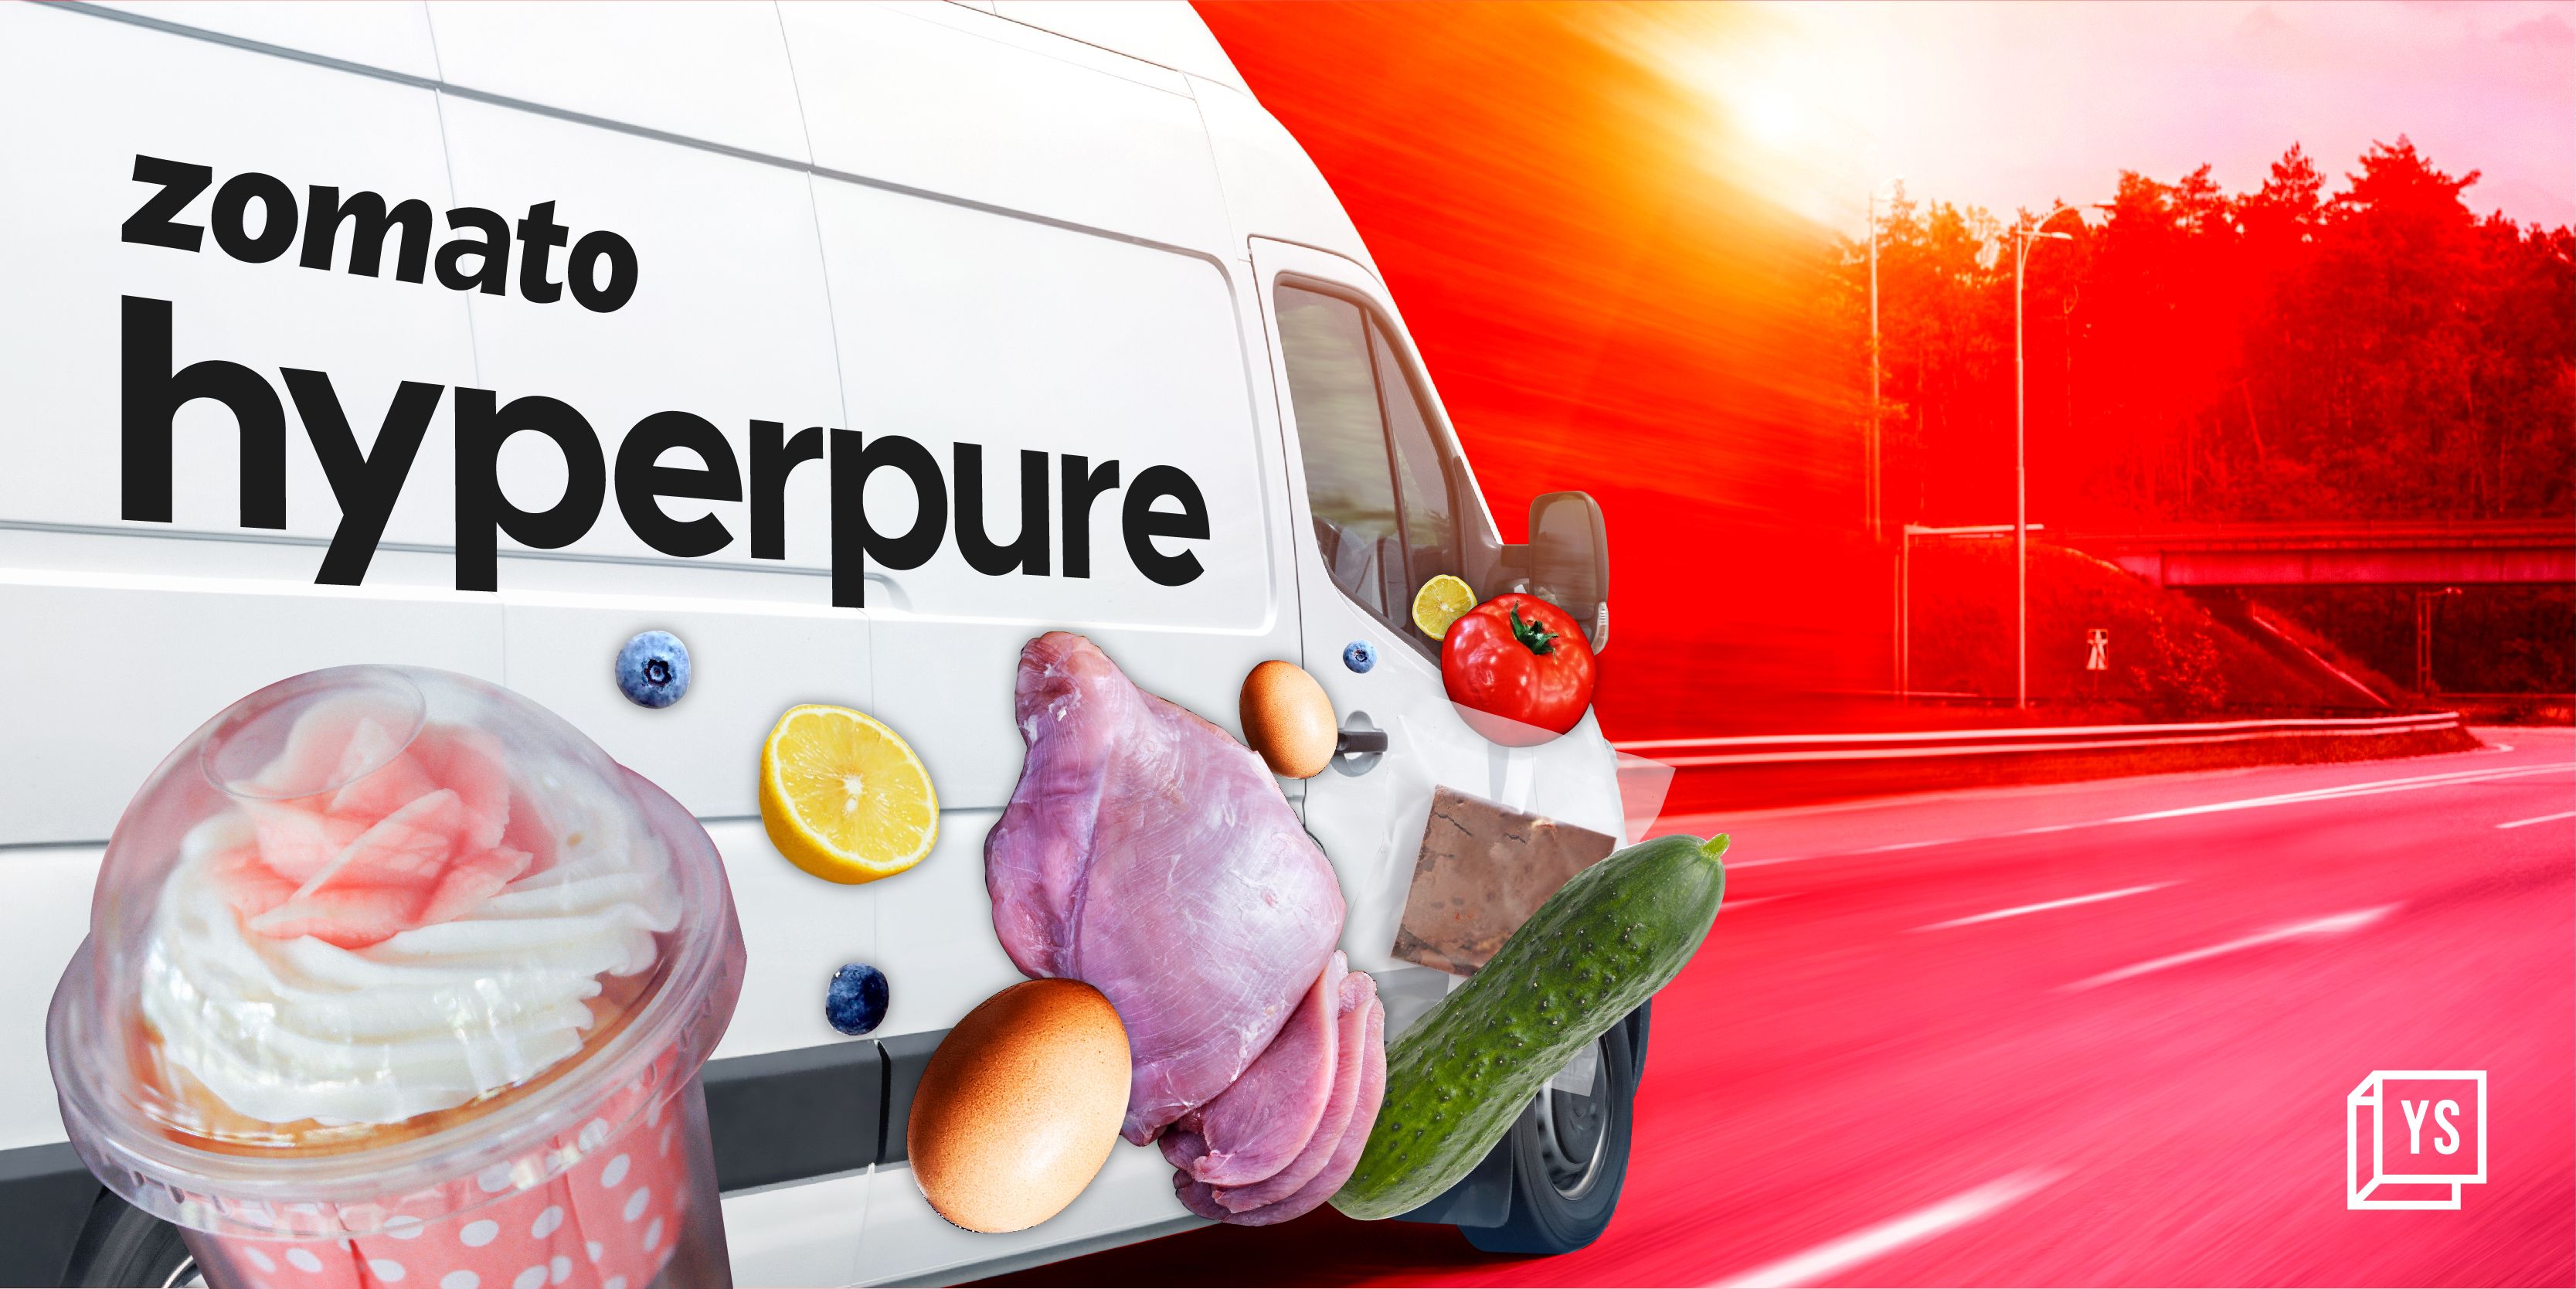 Zomato’s Hyperpure to kick-off ready-to-eat line, inventory stack for restaurants